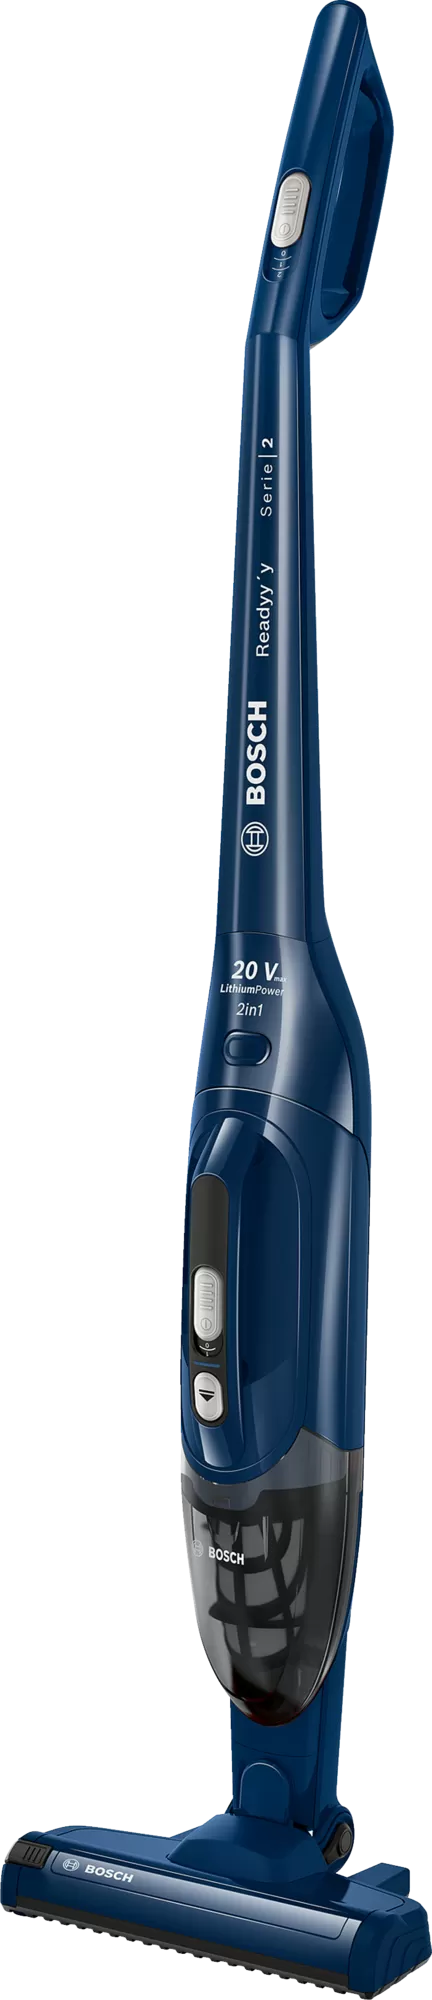 Bosch Rechargeable Handstick Vacuum Cleaner Move Serie2 - 20V Blue